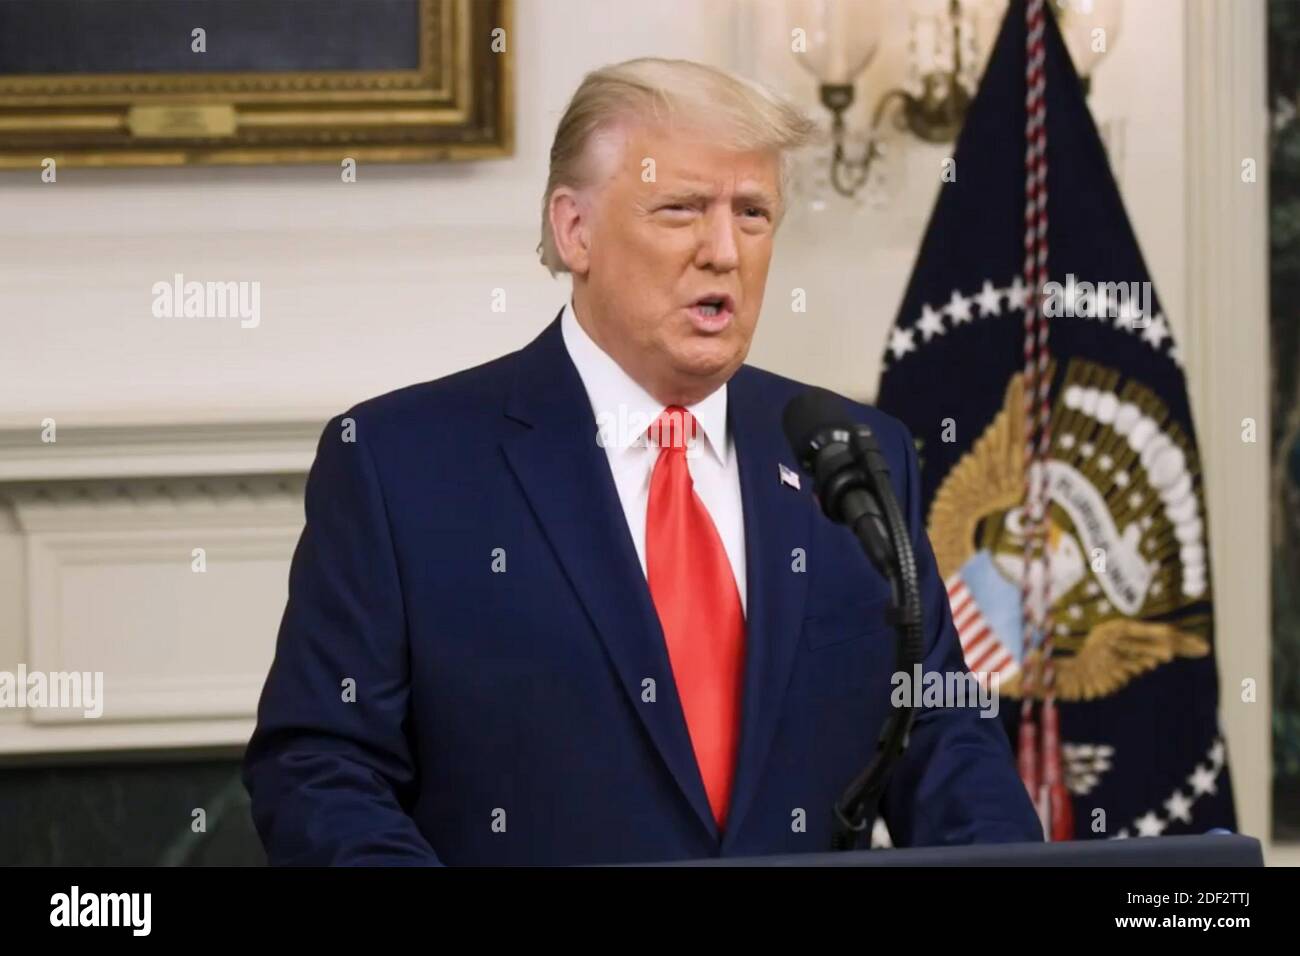 Washington DC, USA. 2nd Dec 2020. In this frame grab from Facebook, President Donald J. Trump rants about the election results in a video recorded at the White House without an audience on Wednesday, December 2, 2020. No press were allowed for the recording. Trump repeated false and unsubstantiated allegations of widespread election fraud as he continues to refuse to concede the election that he lost to President-elect Joe Biden a month ago. Credit: UPI/Alamy Live News Stock Photo